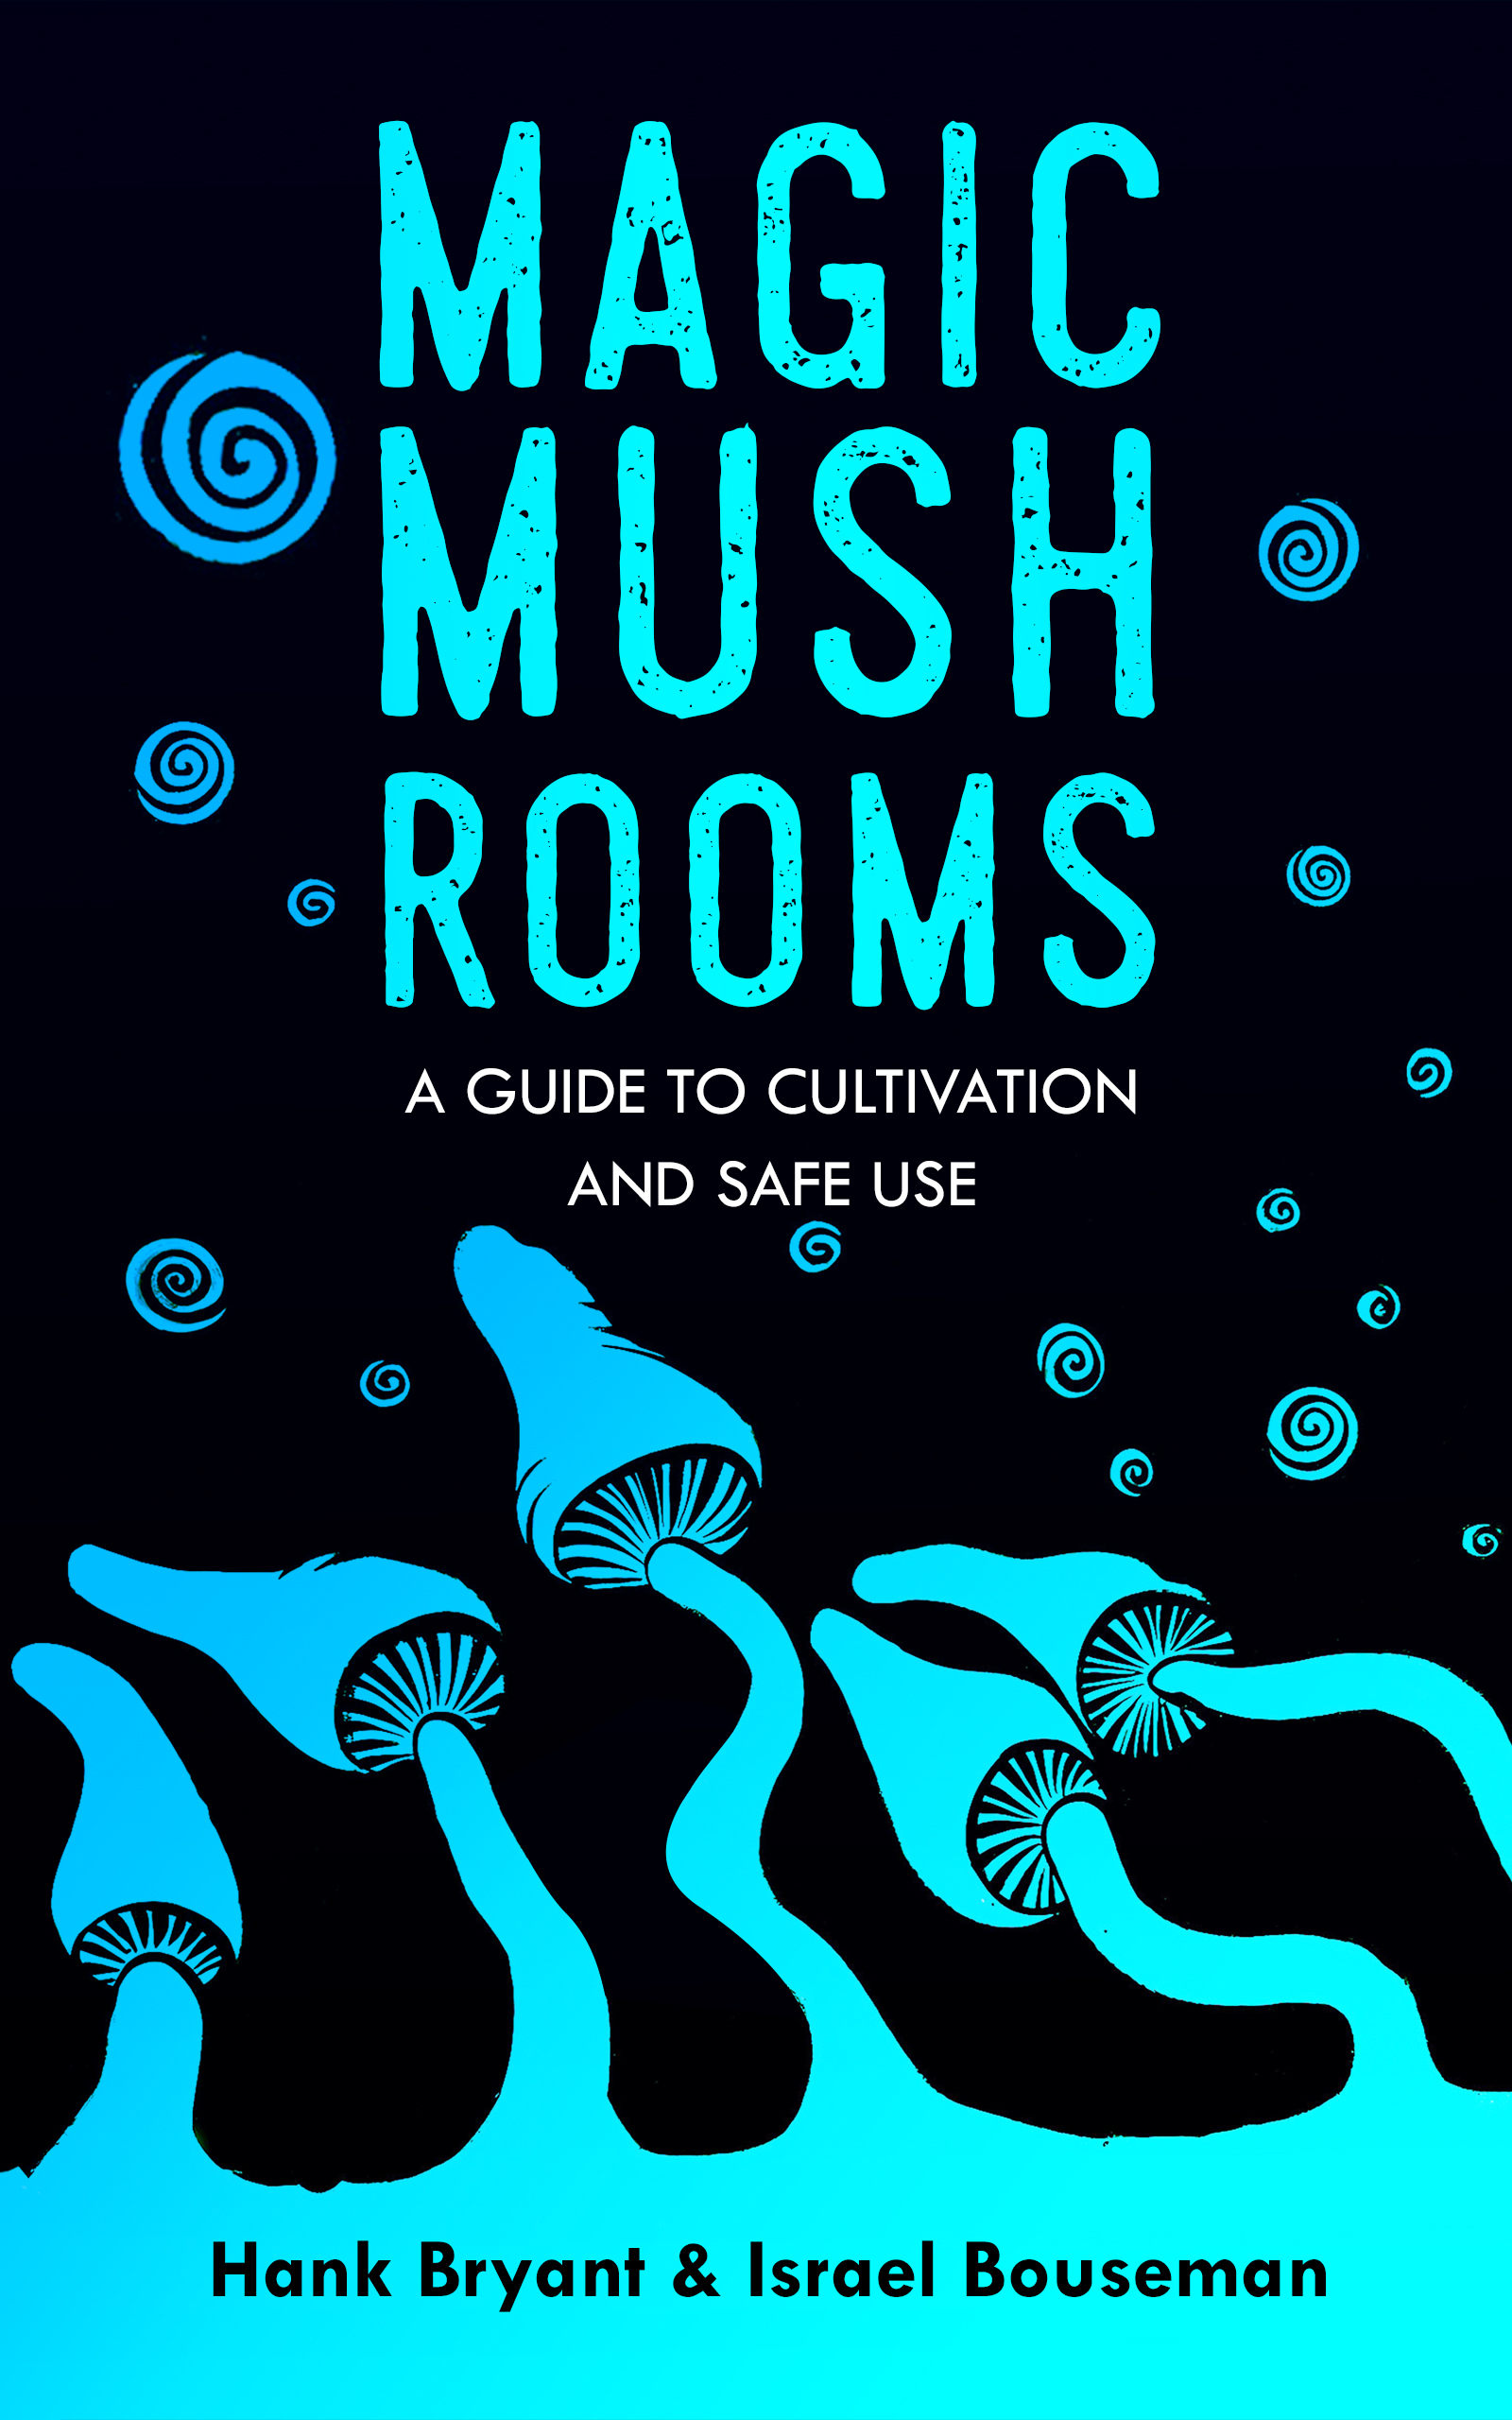 FREE: Magic Mushrooms: The Psilocybin Mushroom Bible – A Guide to Cultivation and Safe Use by Hank Bryant & Israel Bouseman